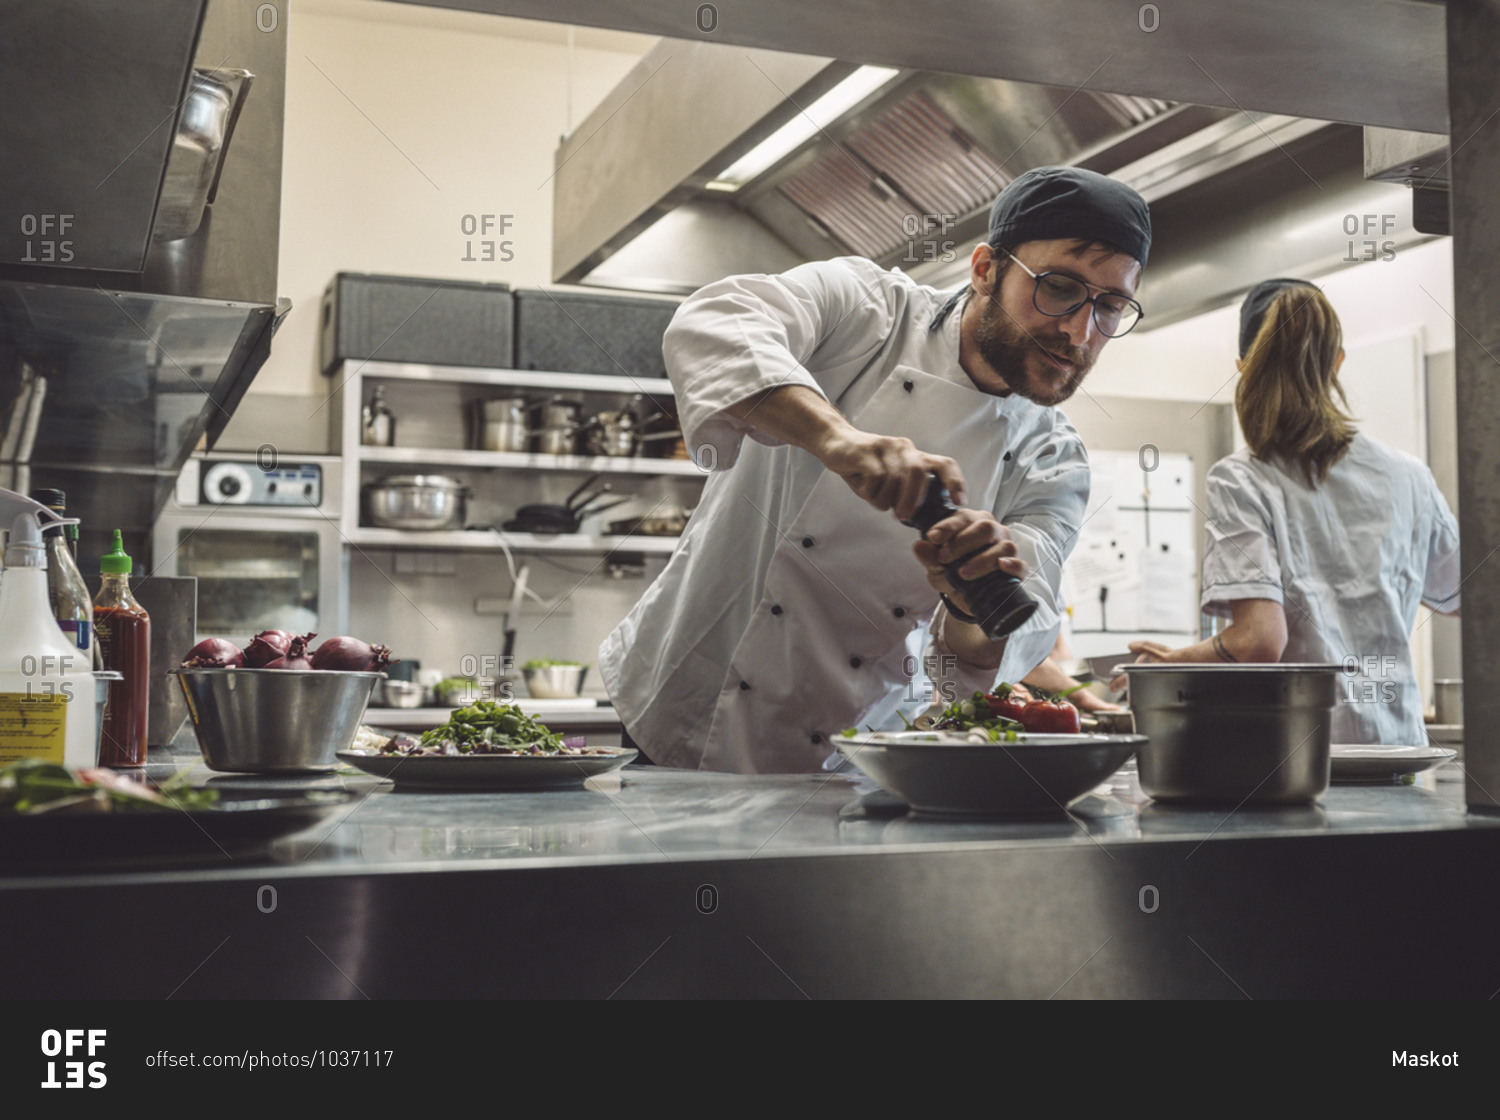 Low angle view of male chef seasoning food in commercial kitchen